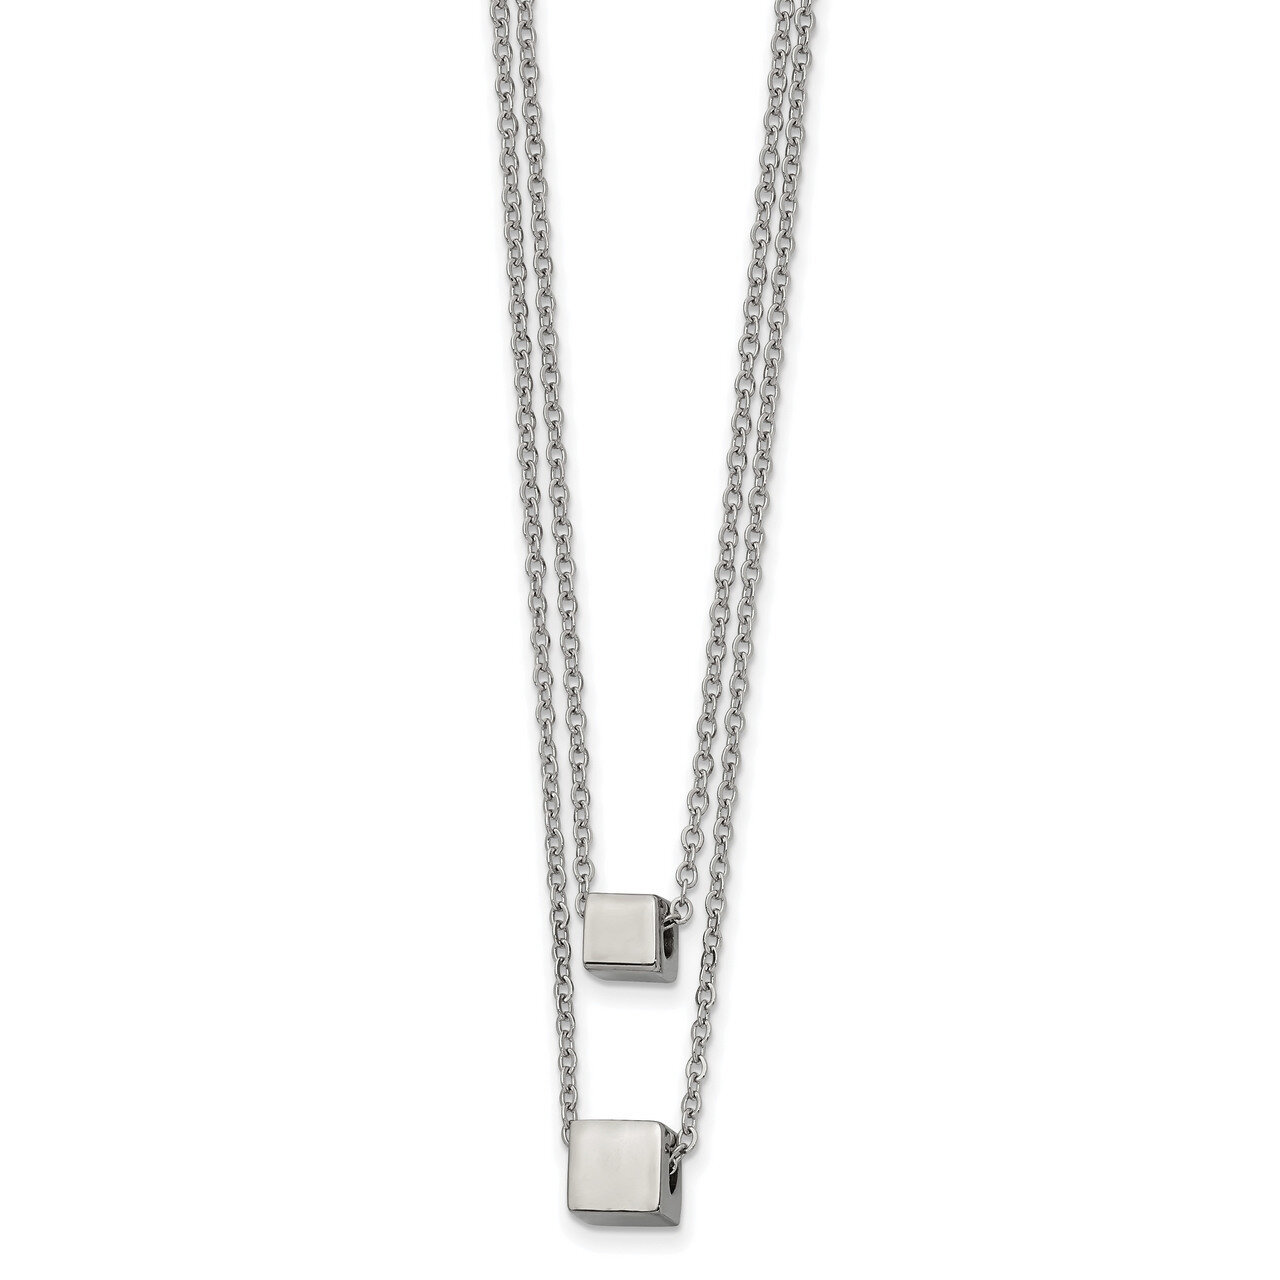 Two Strand 17 Inch with 2 Inch Extender Necklace Stainless Steel Polished SRN2662-18